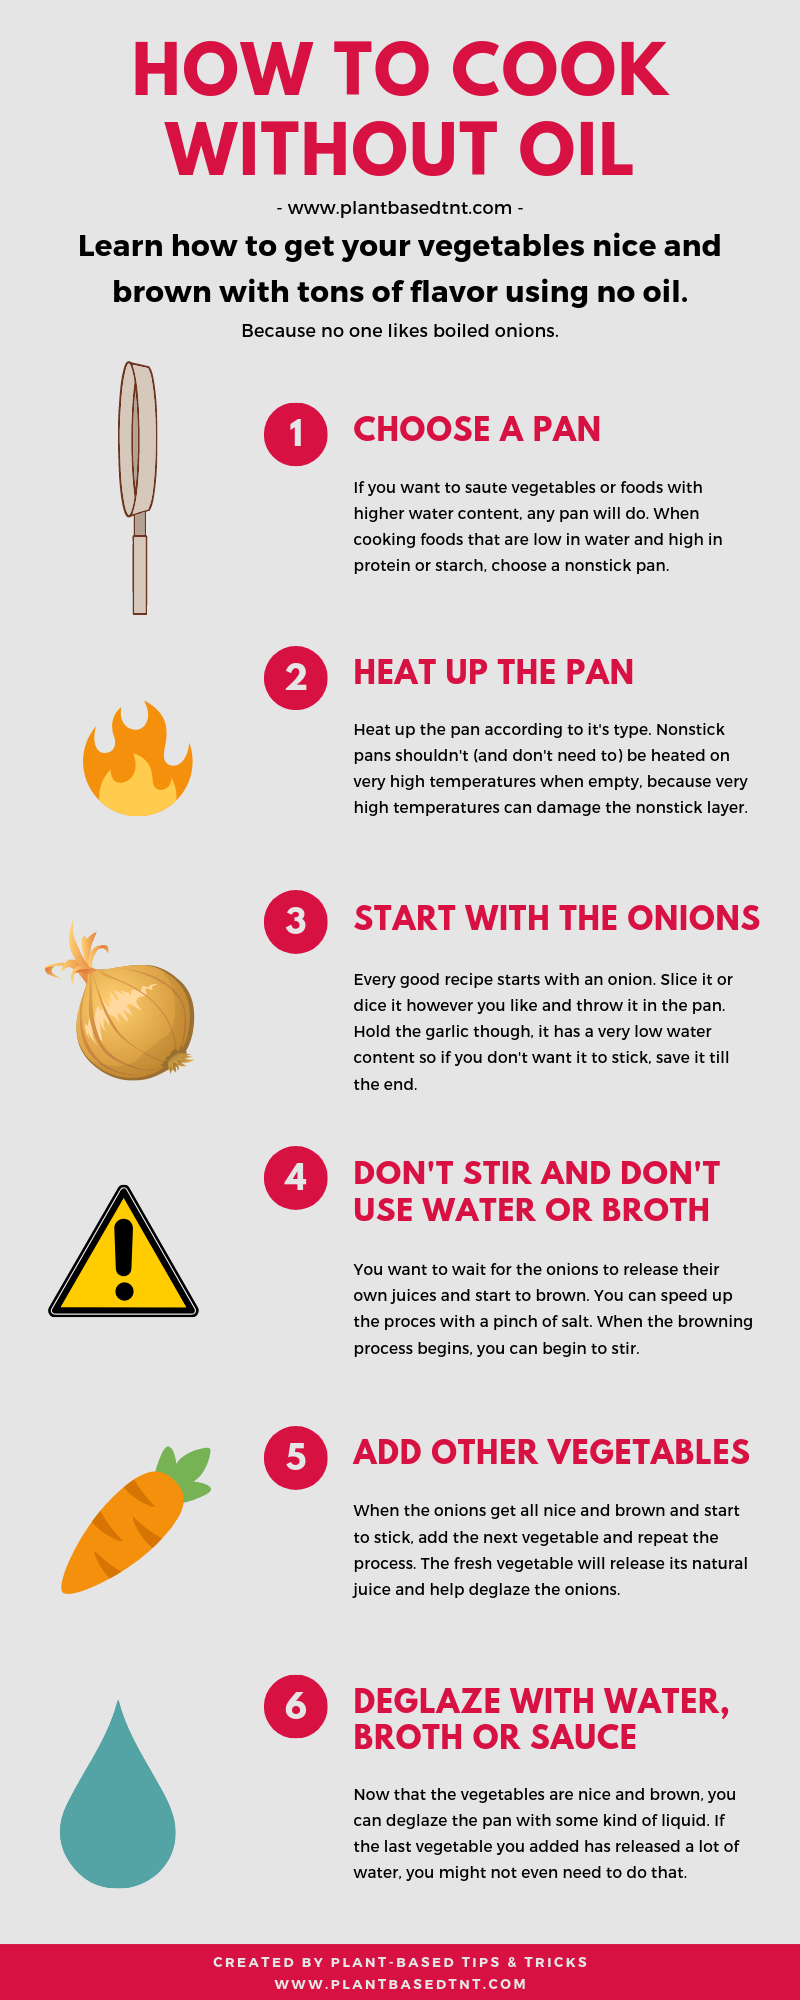 How to cook without oil?